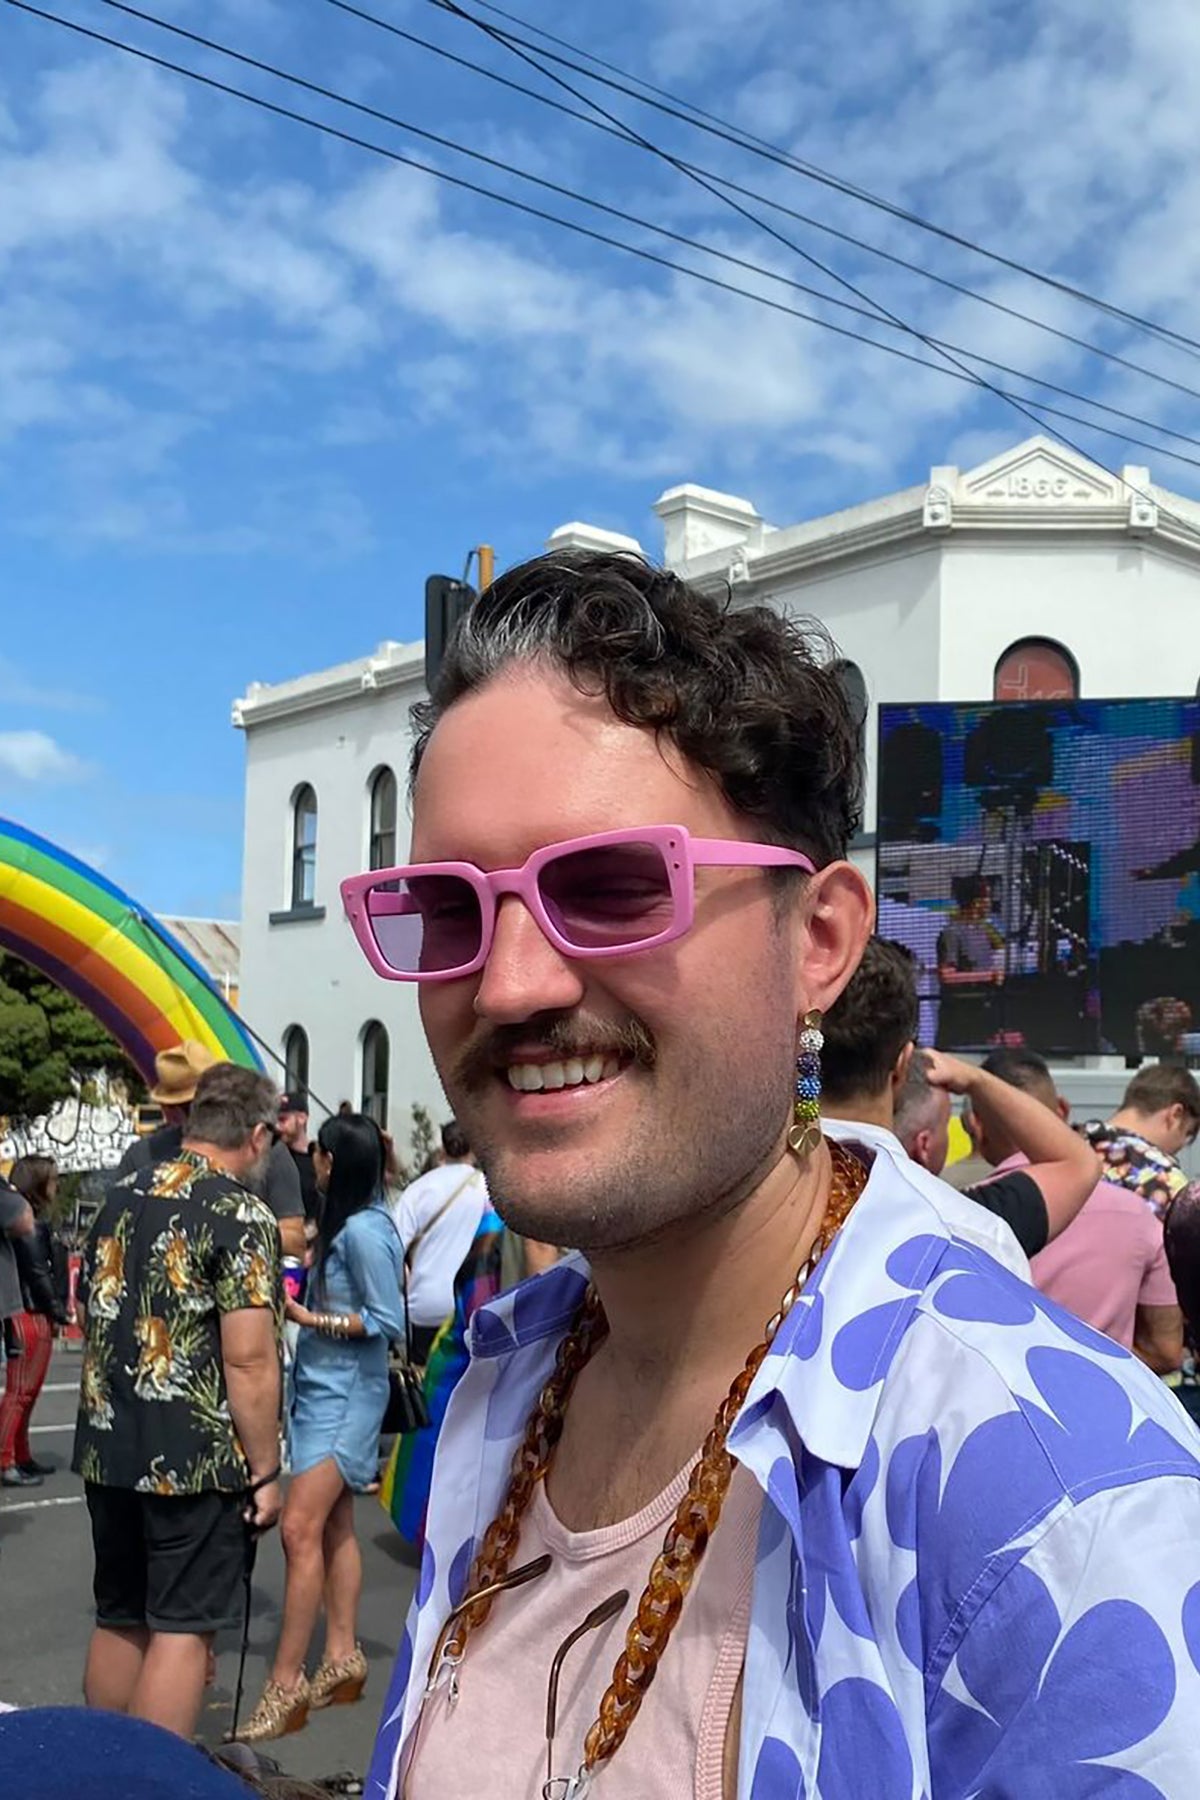 Connor wears the Mirror Mirror earrings at an outdoor event.  He is also wearing pink sunglasses and a white and purple floral shirt over a light pink singlet.  A crowd of people are watching a big screen and an inflatable rainbow is in the background.